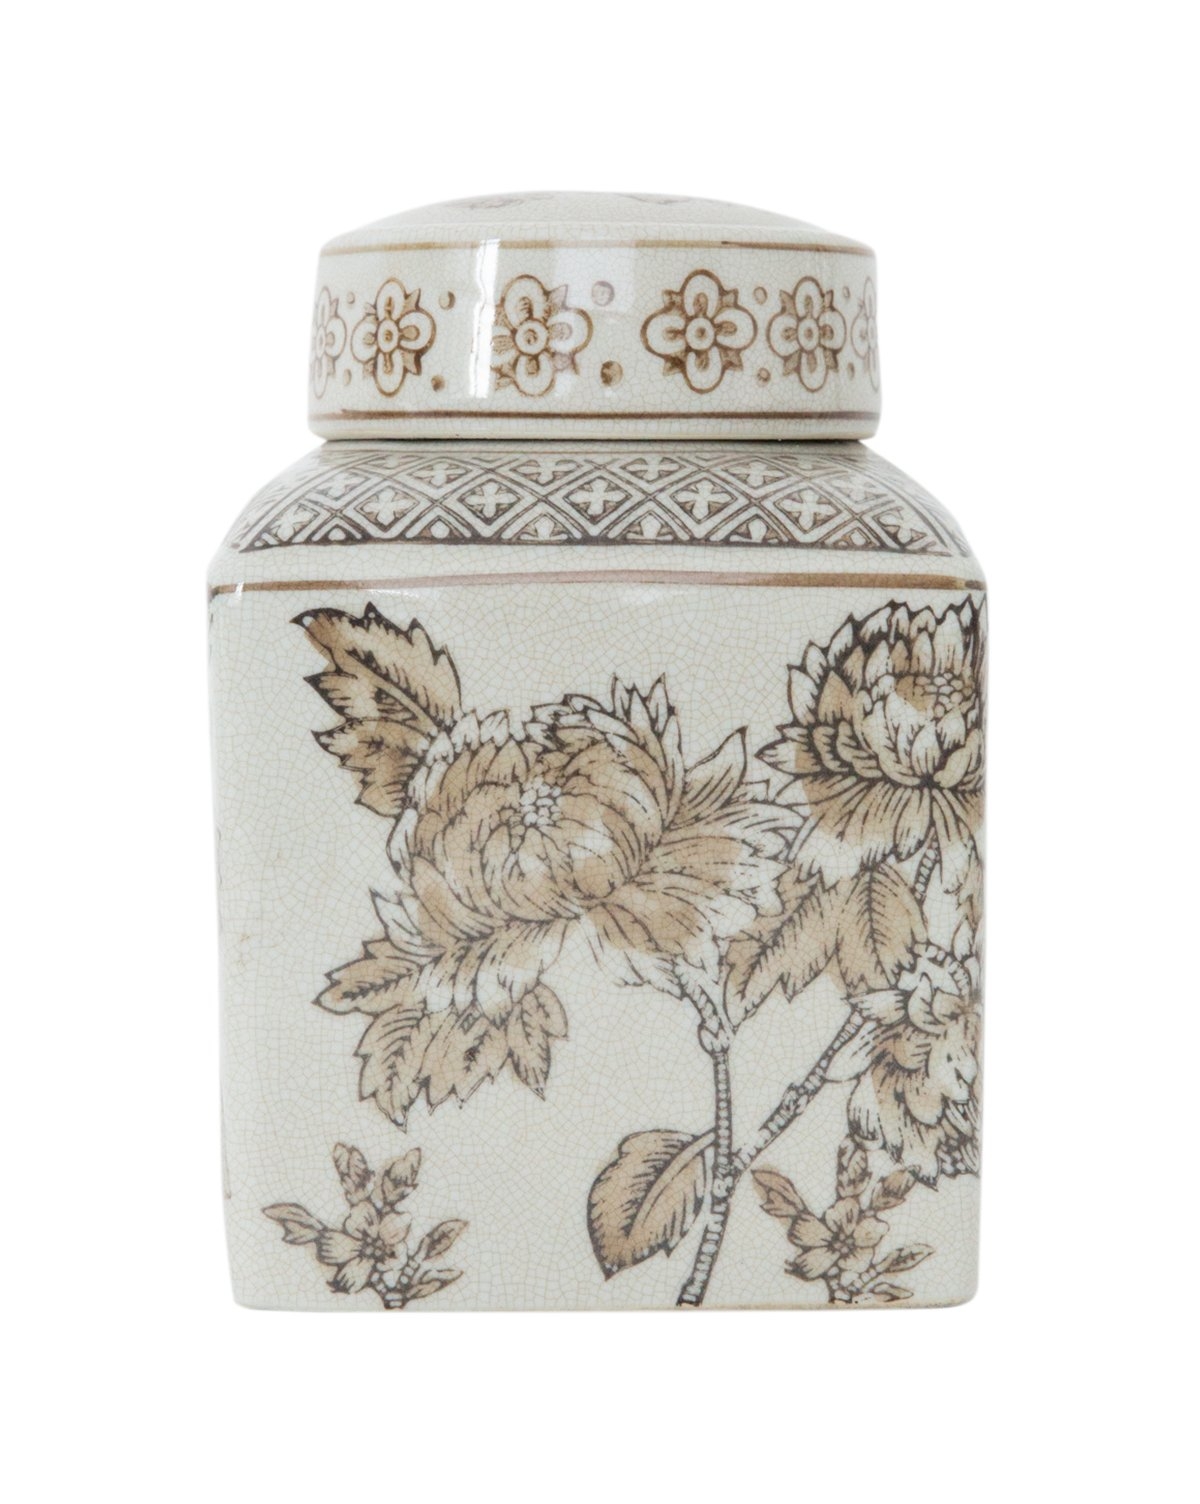 TAUPE GINGER JAR - SMALL - Image 0